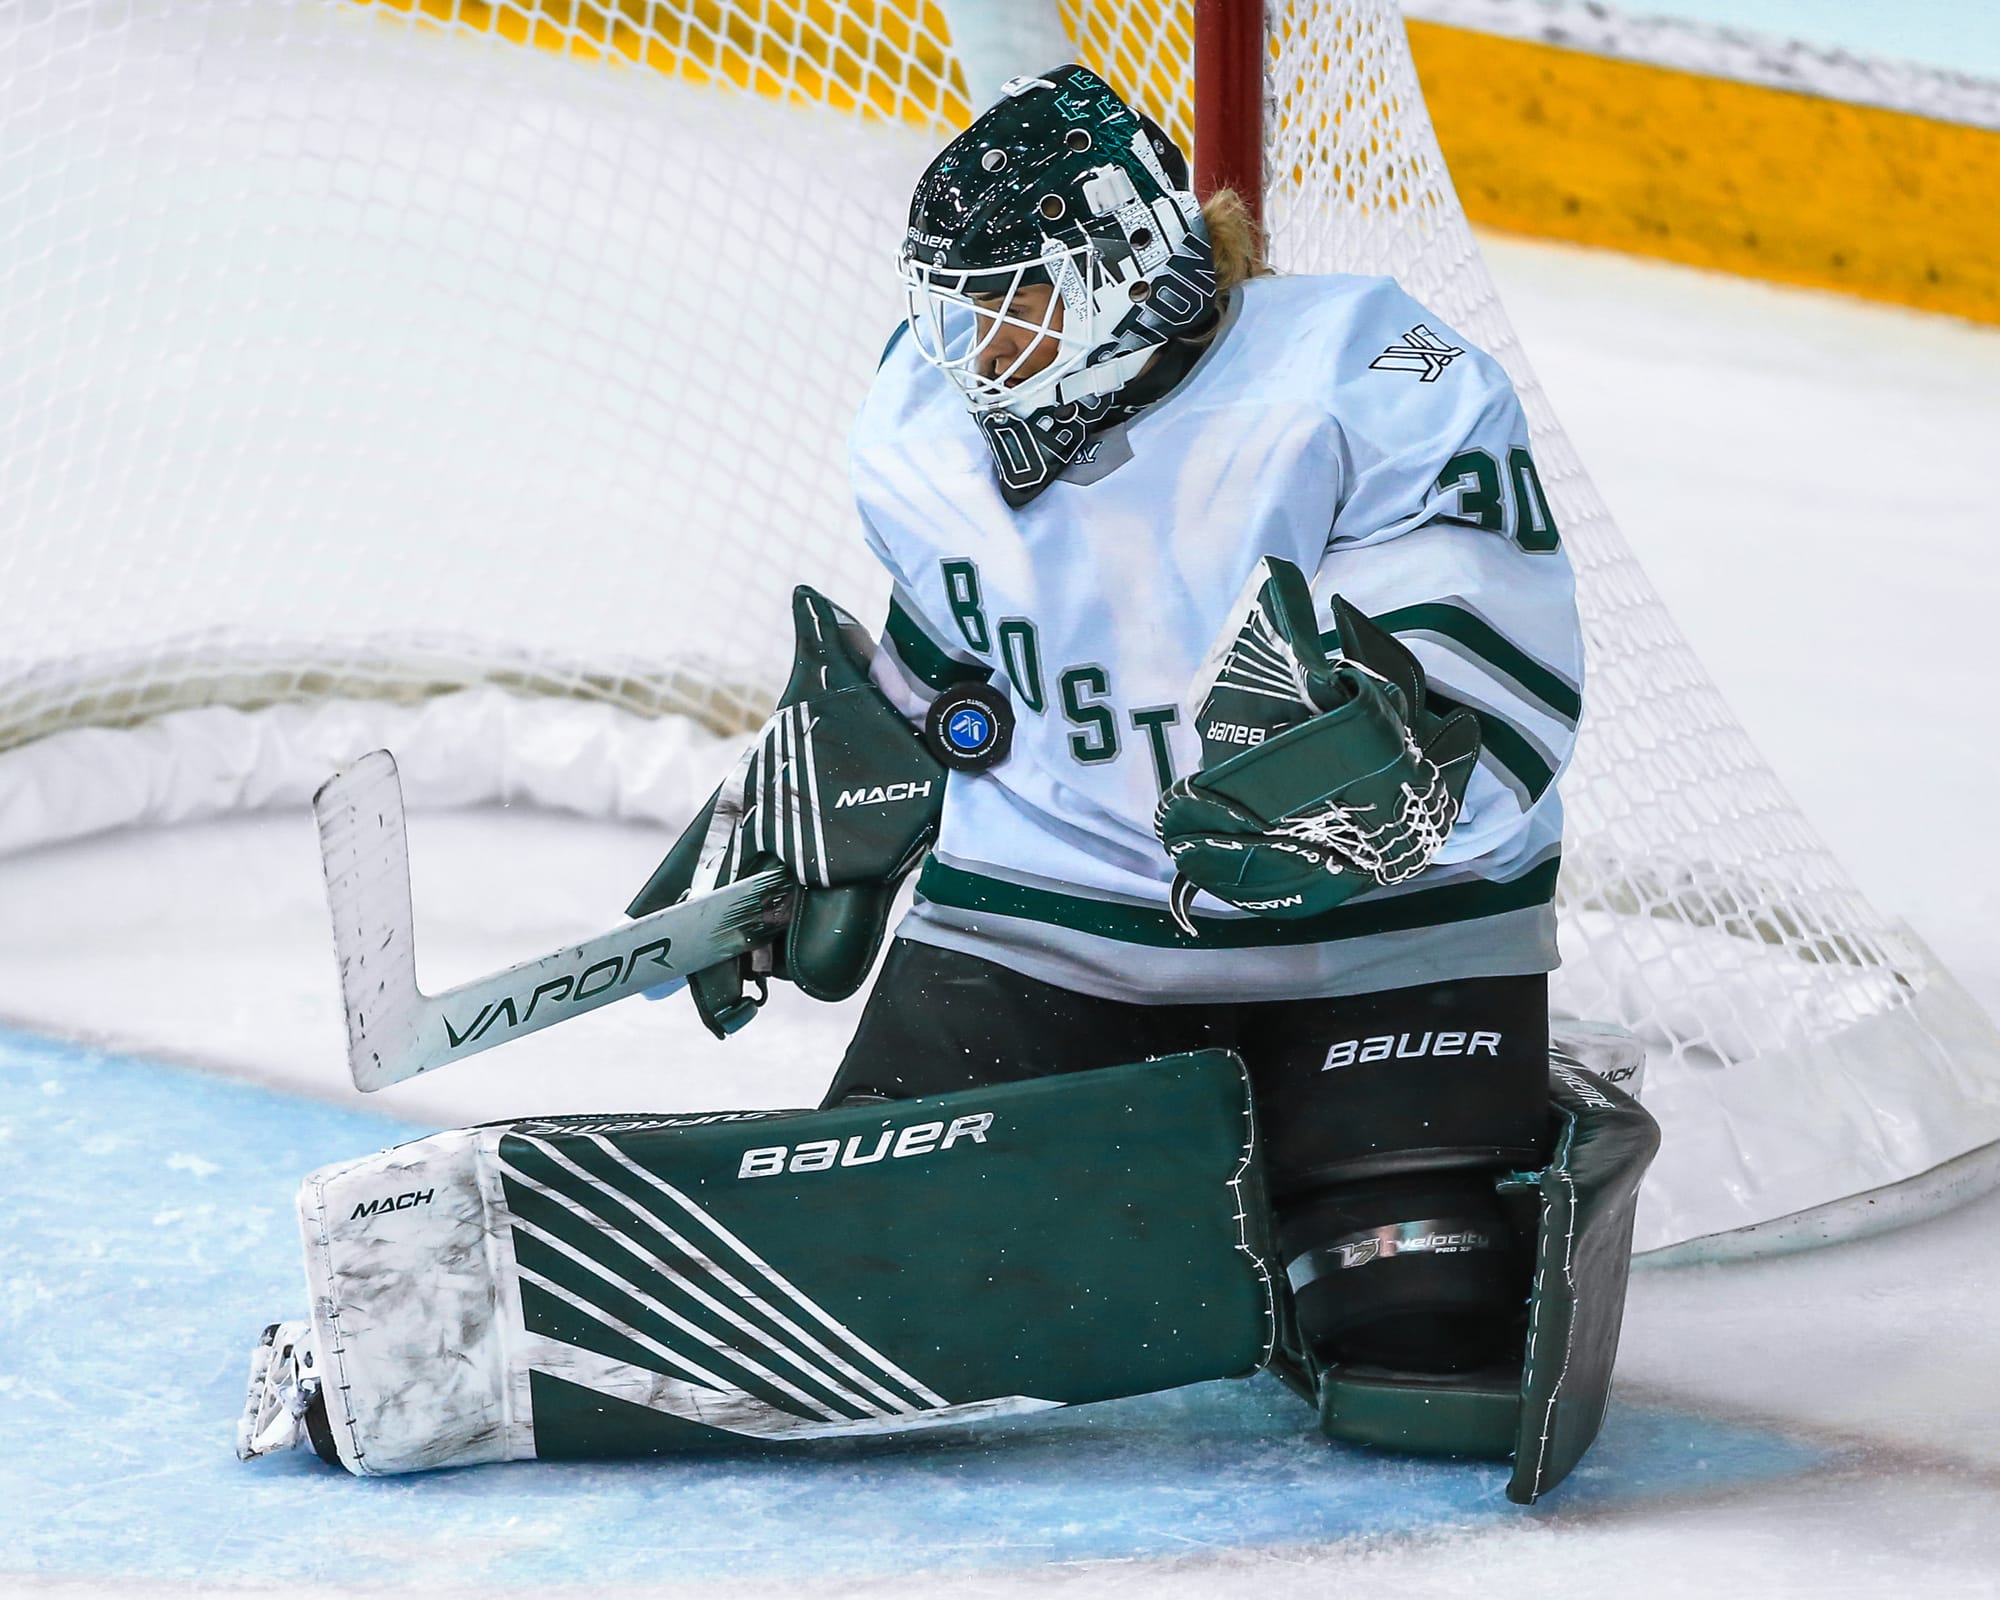 Emma Söderberg makes a save against Toronto. The puck is in her chest. She is wearing a white away uniform and her green Boston gear and mask. 